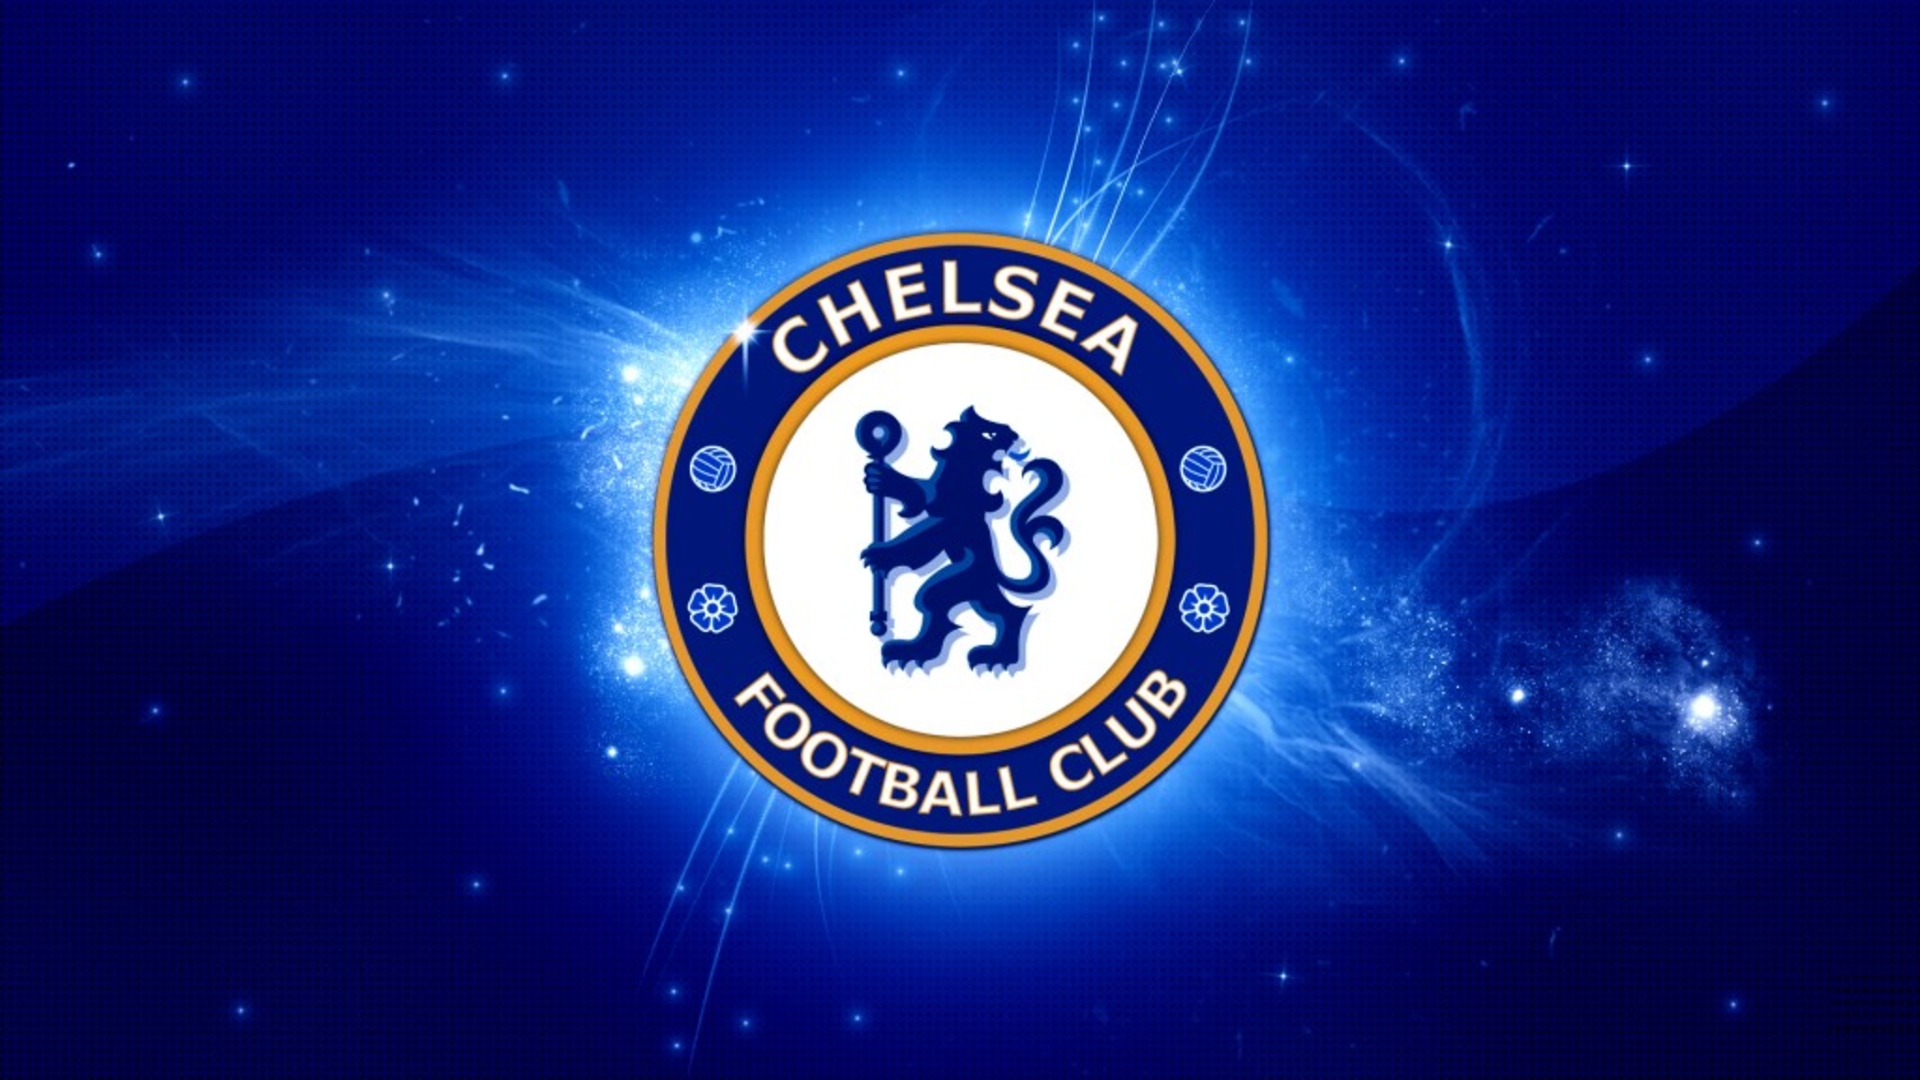 Football club Chelsea logo wallpapers and images - wallpapers, pictures